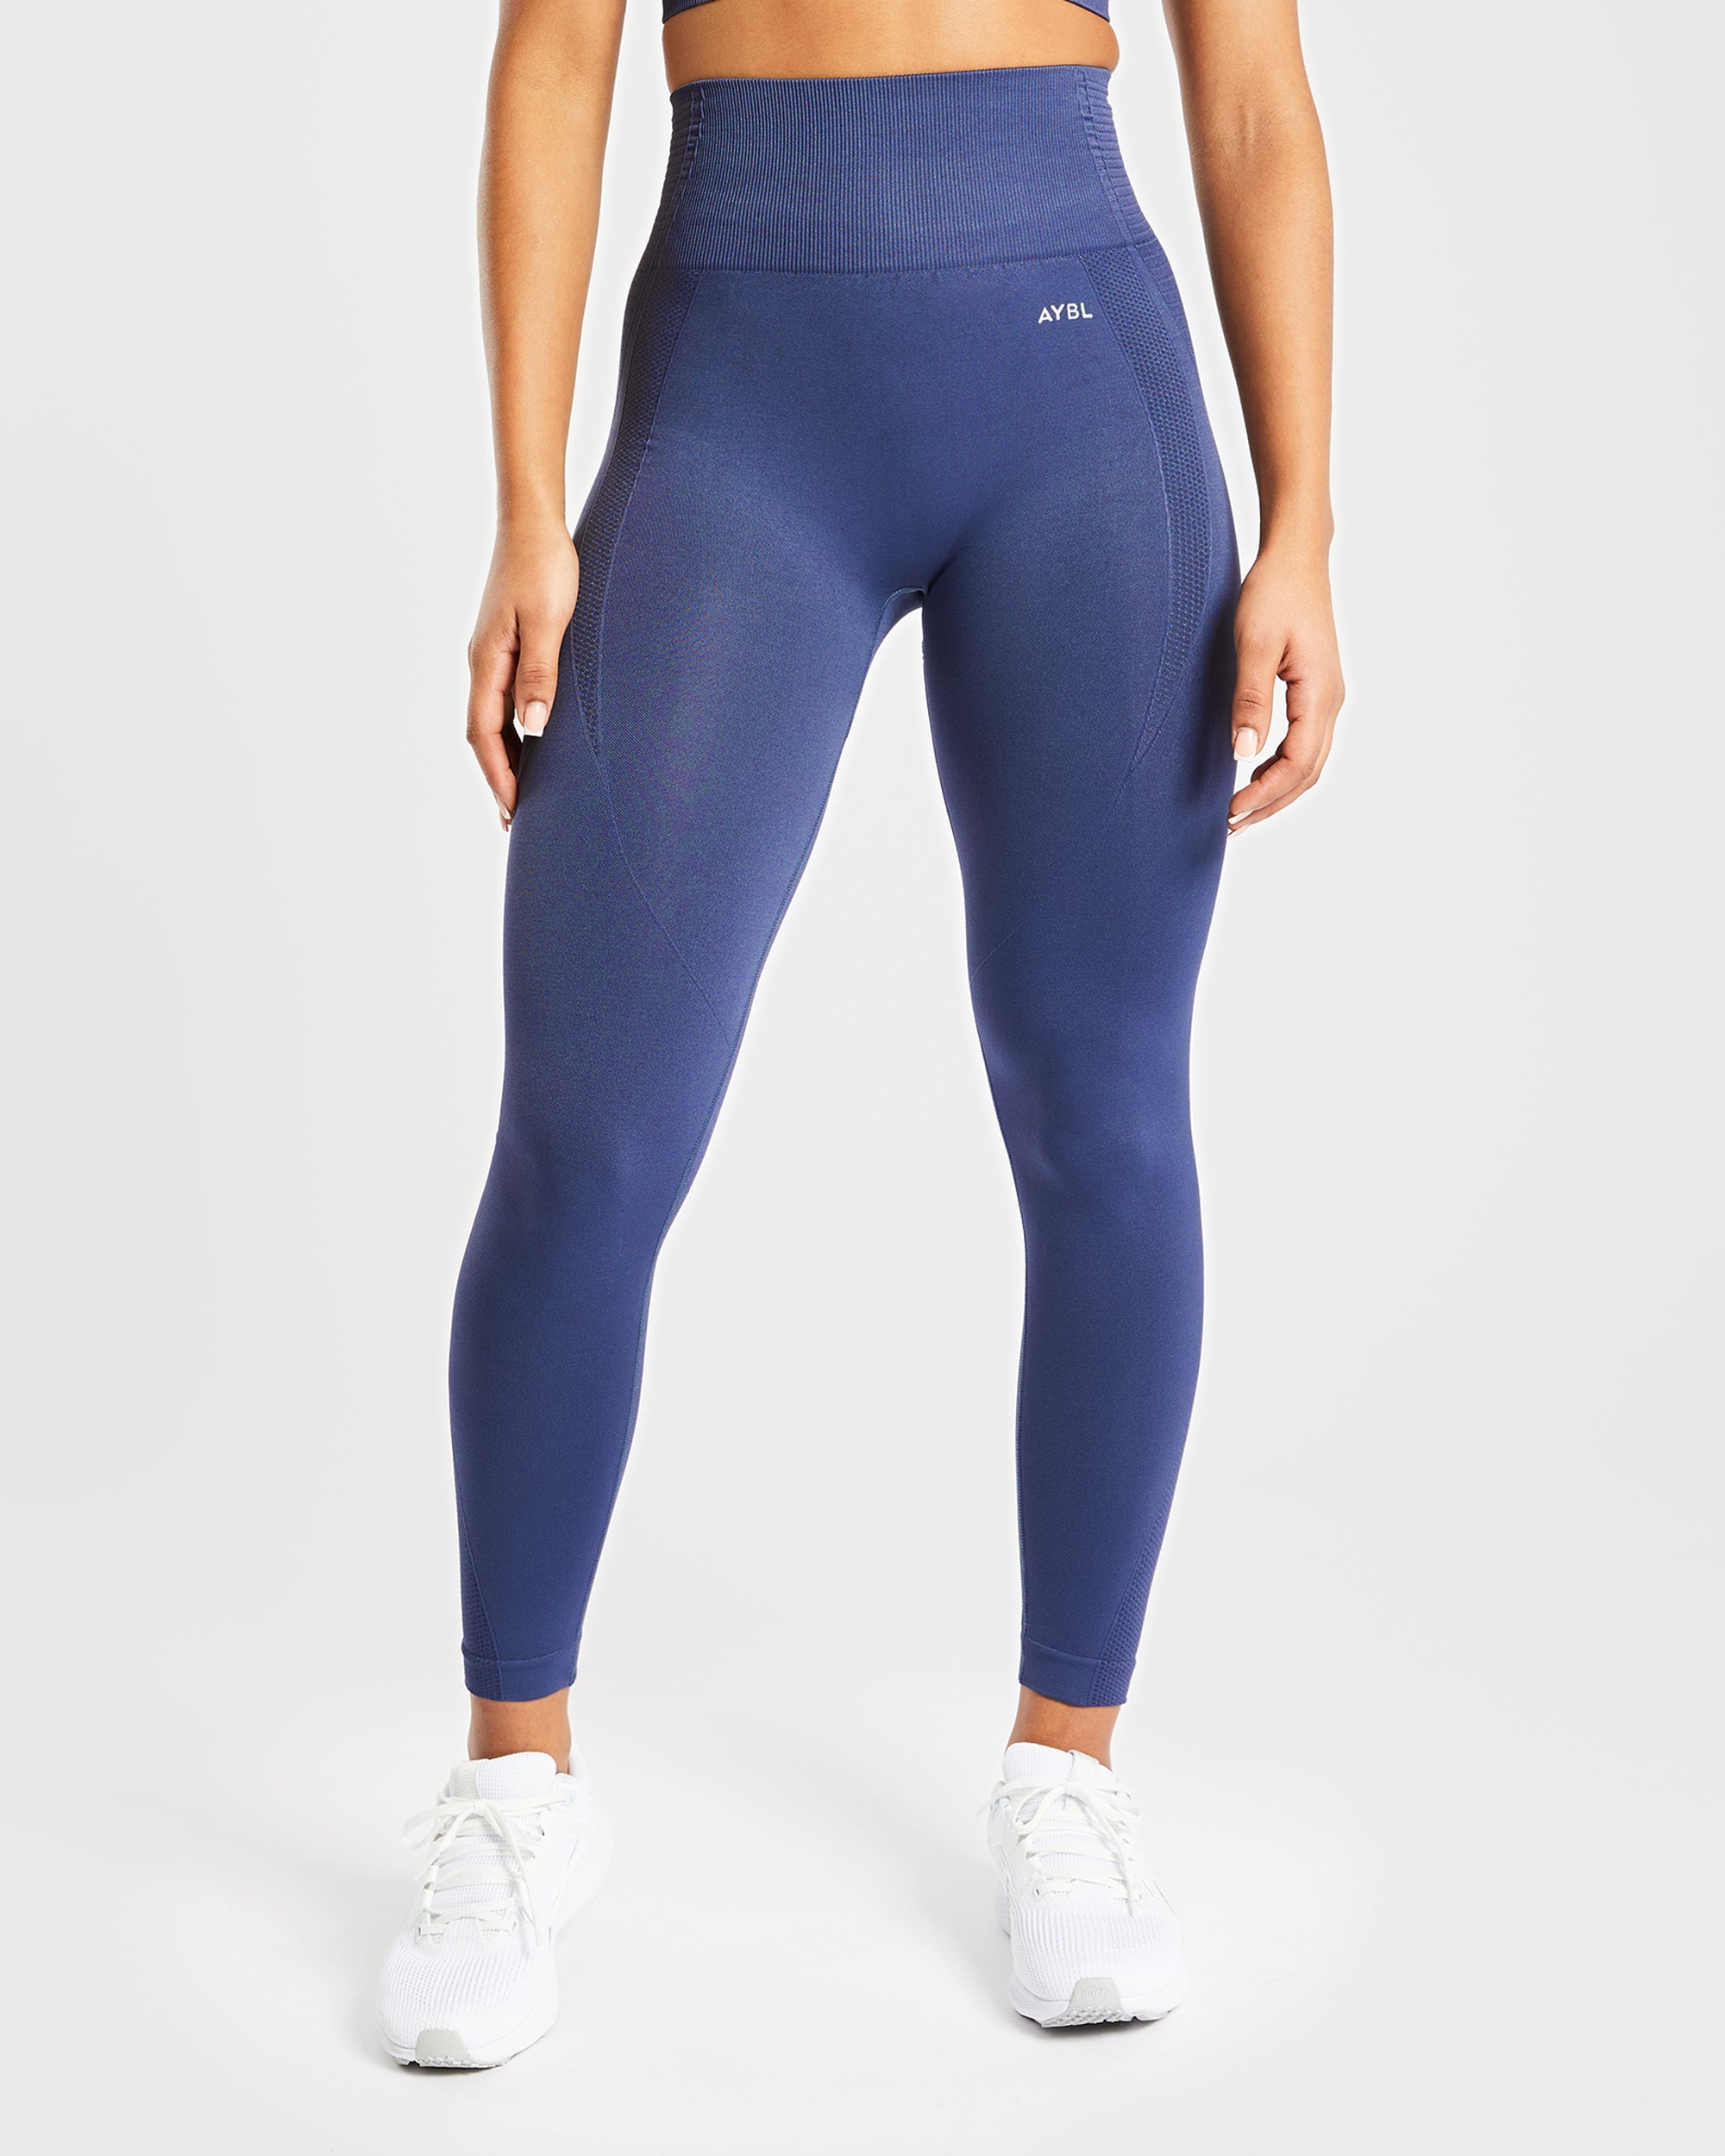 Seamless Compression Leggings  Here's our lovely Jasmine